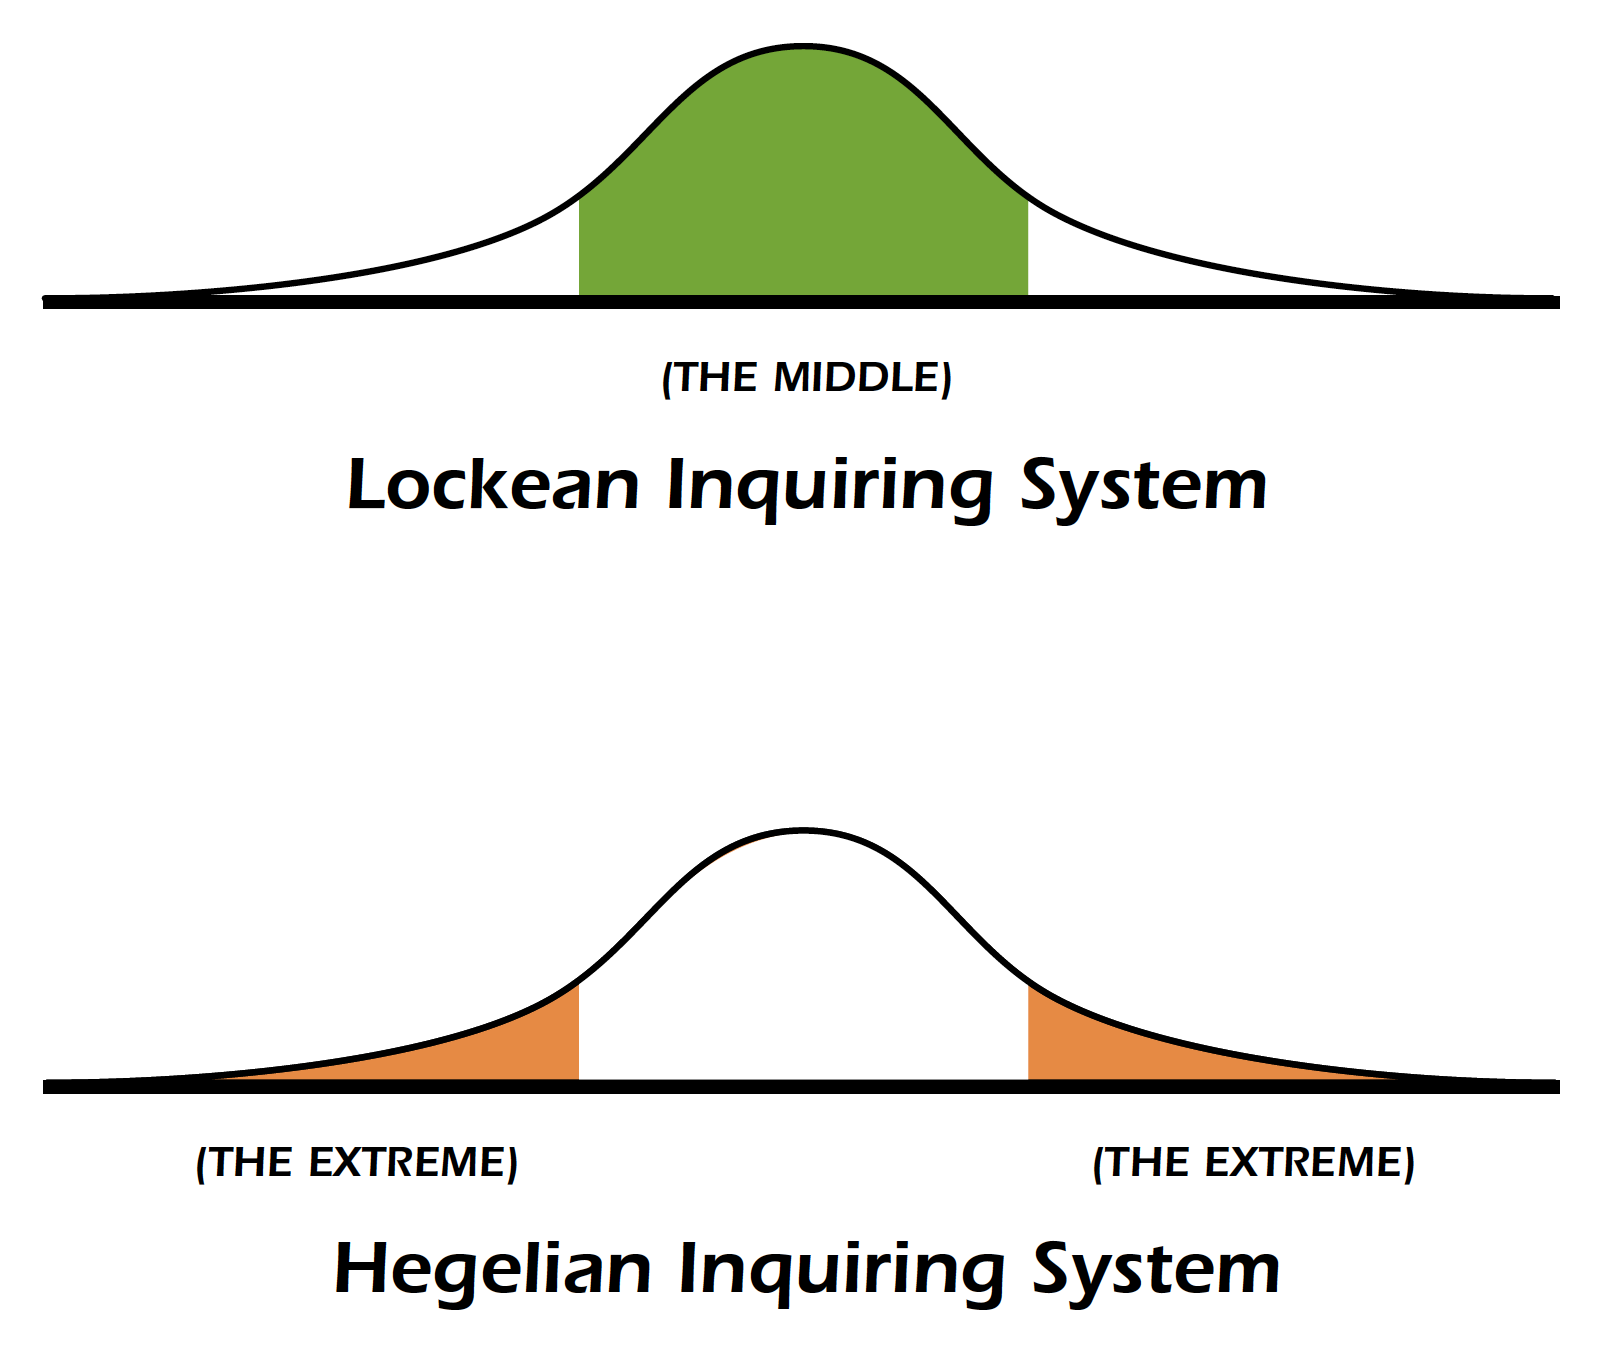 Two Inquiring Systems